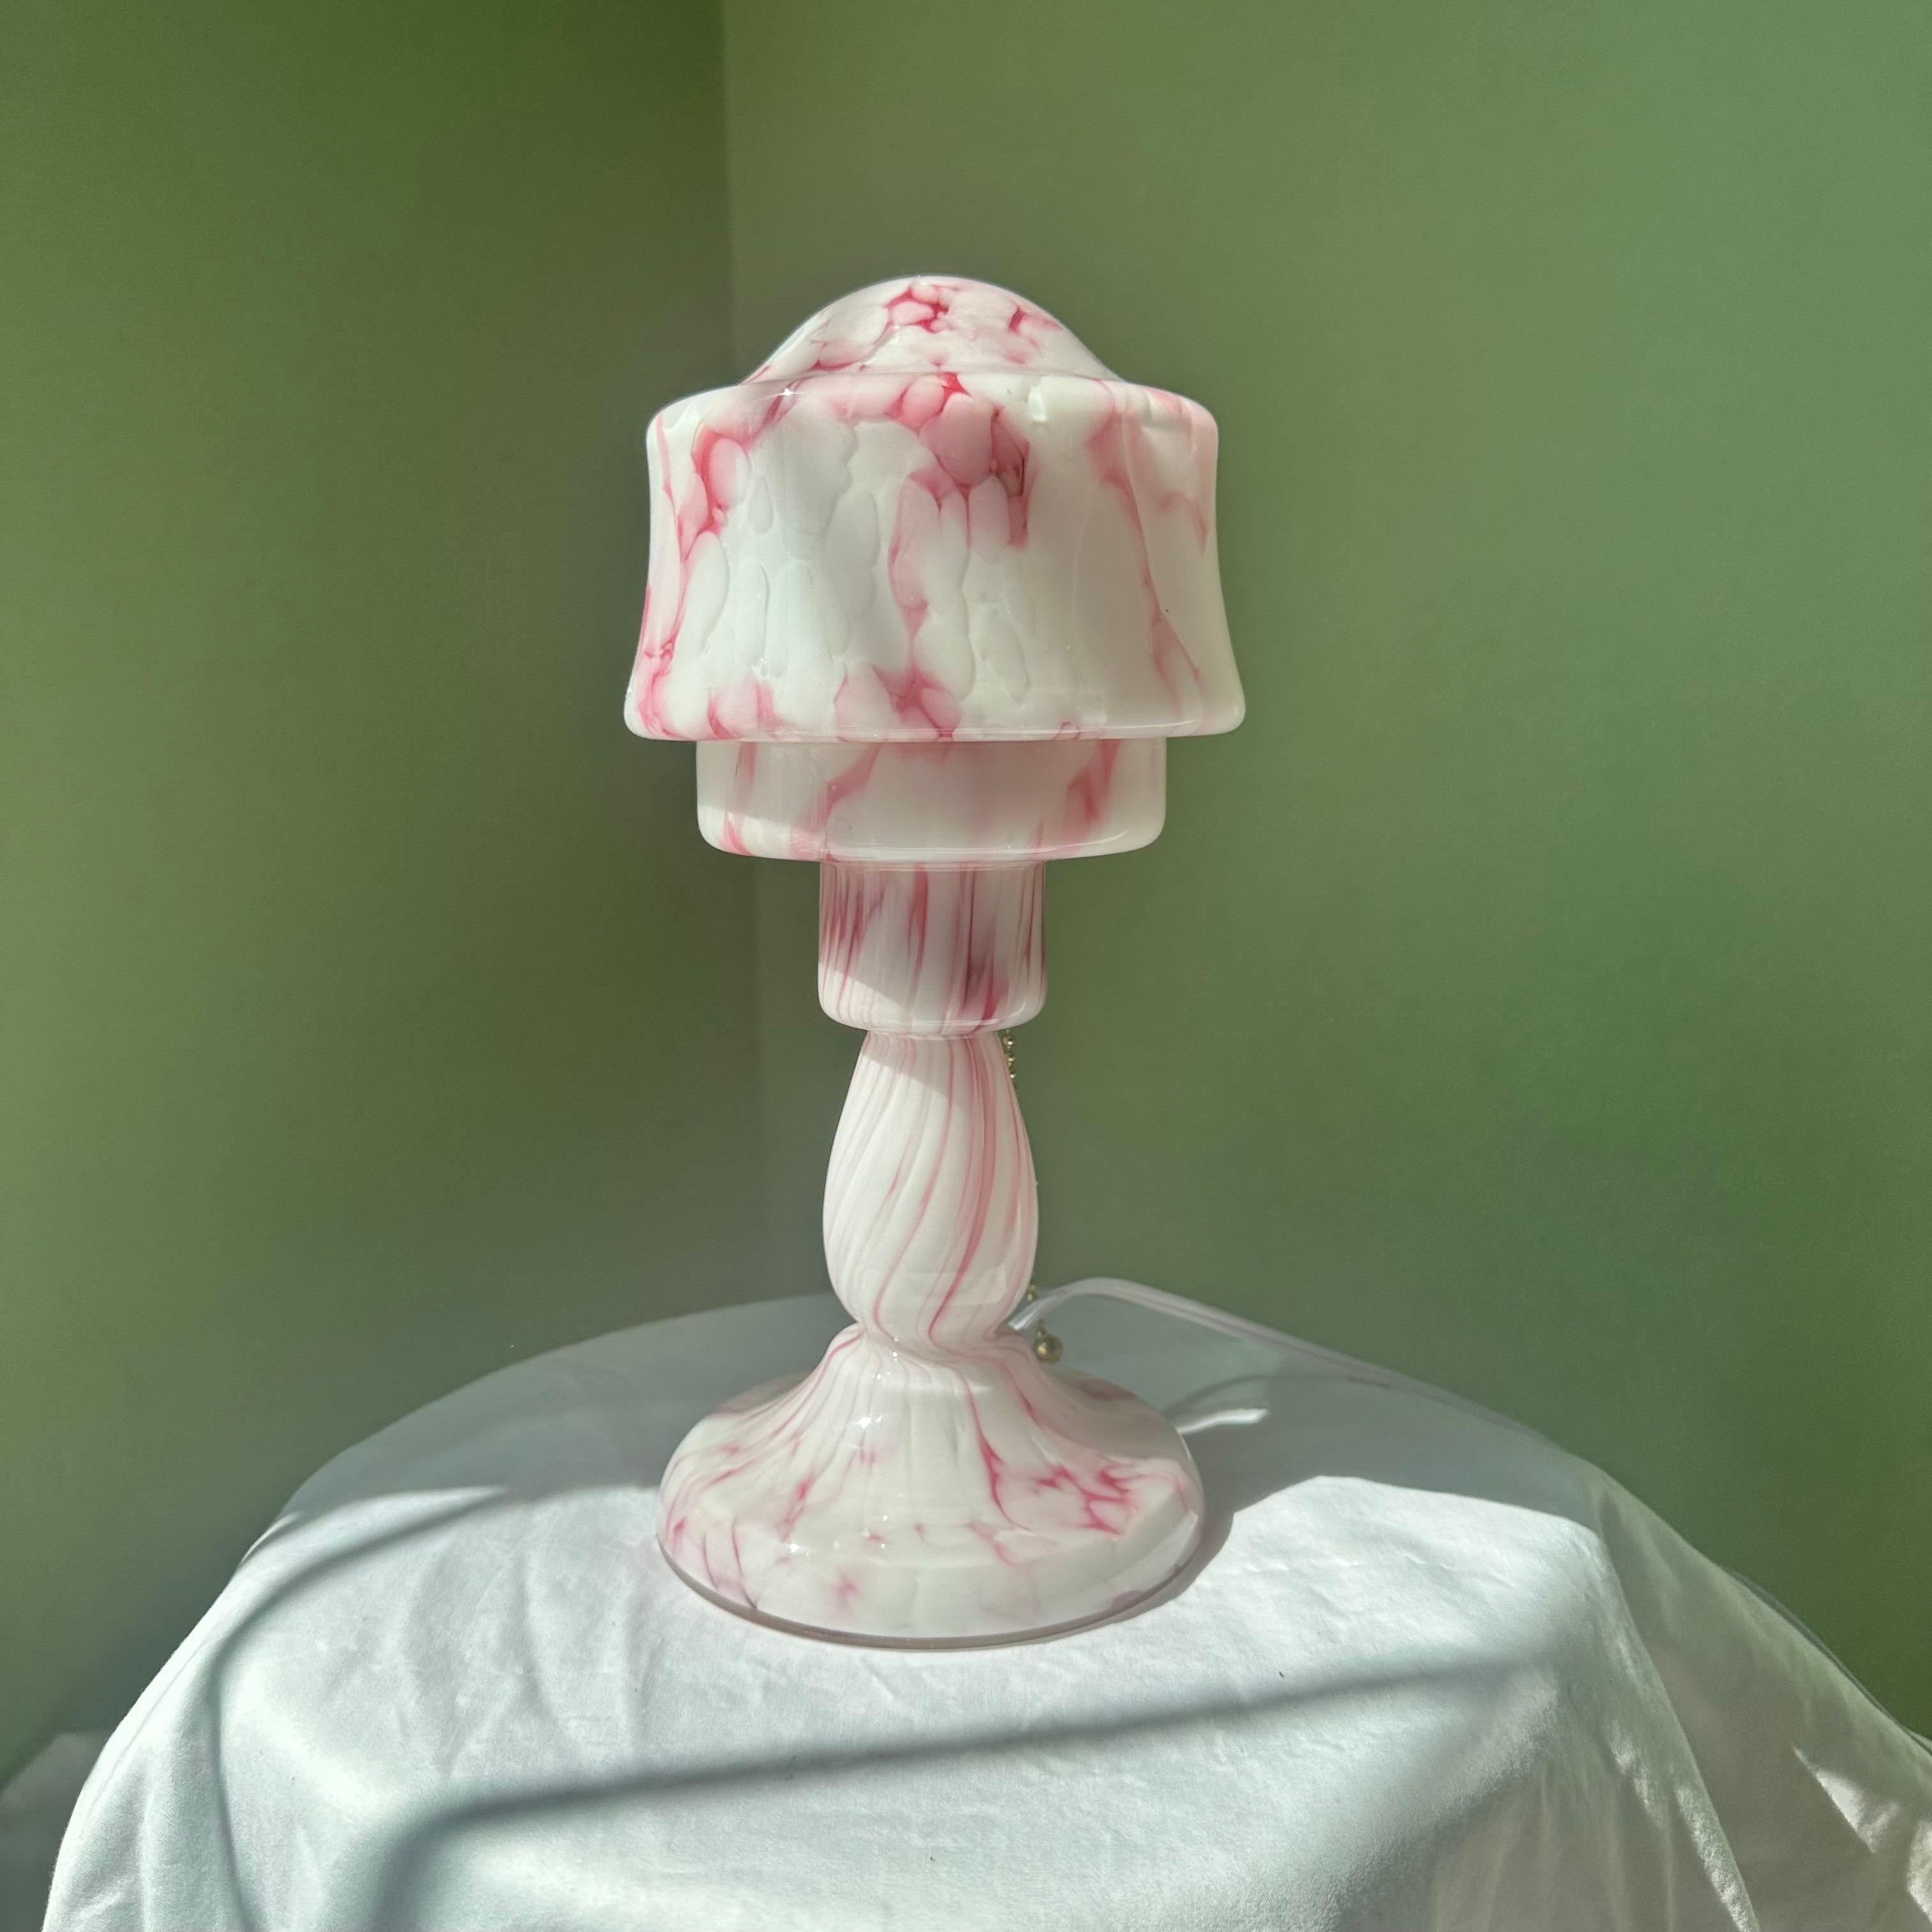 Pink and White Modernist Art Deco Glass Mushroom Table Lamp. Small functionalist, streamline Art Deco mushroom table lamp or desk lamp. Modernist in style with pink and white milky molded glass with marbled swirl detailing, with a few clear bubbles